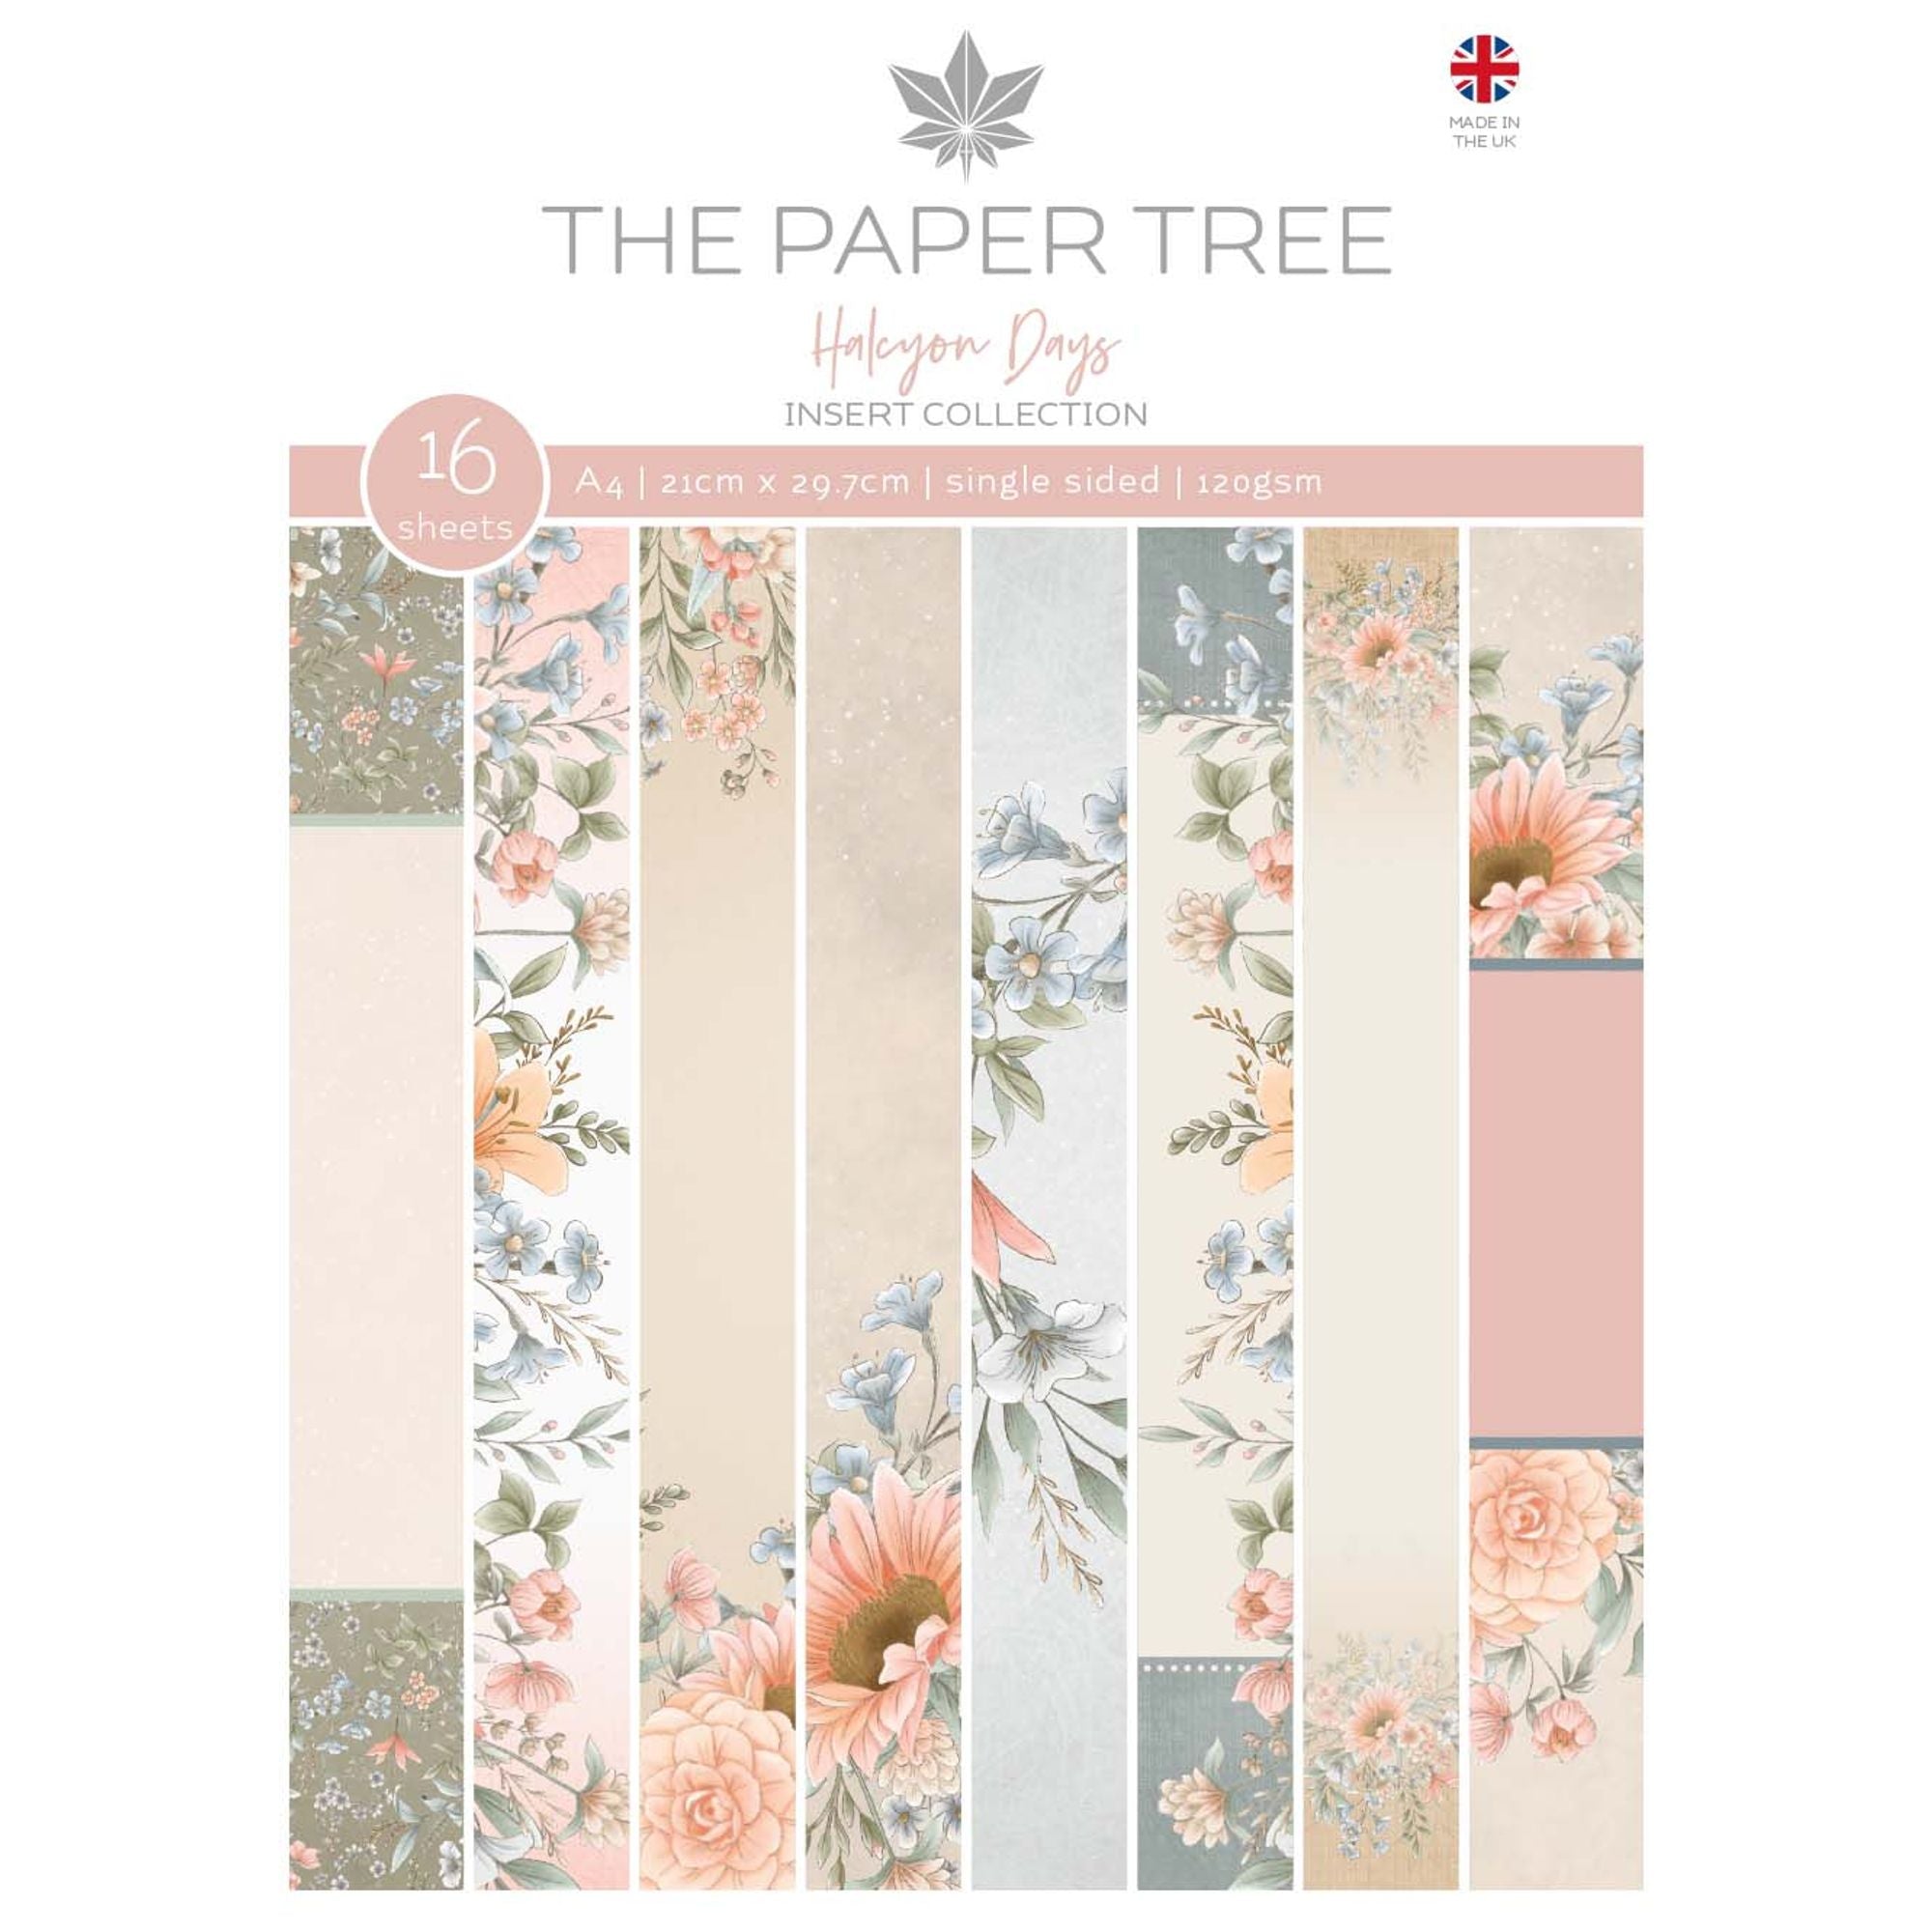 The Paper Tree Halcyon Days A4 Insert Collection